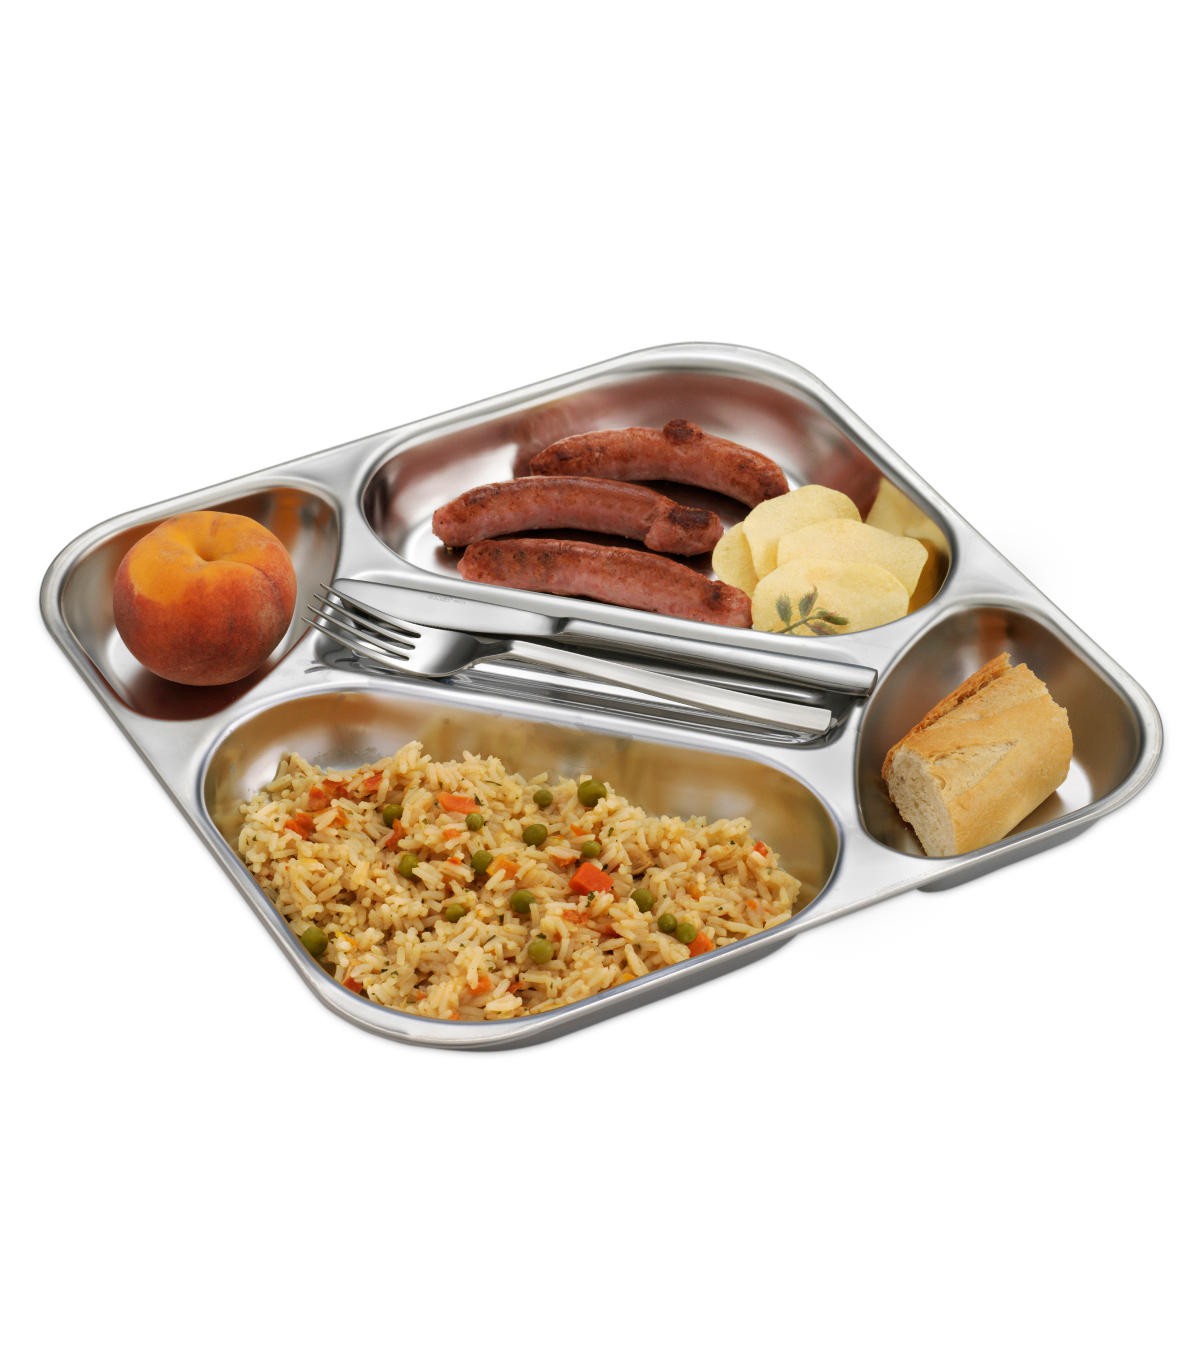 Plateau Repas Isotherme - 4 compartiments - CashShopping